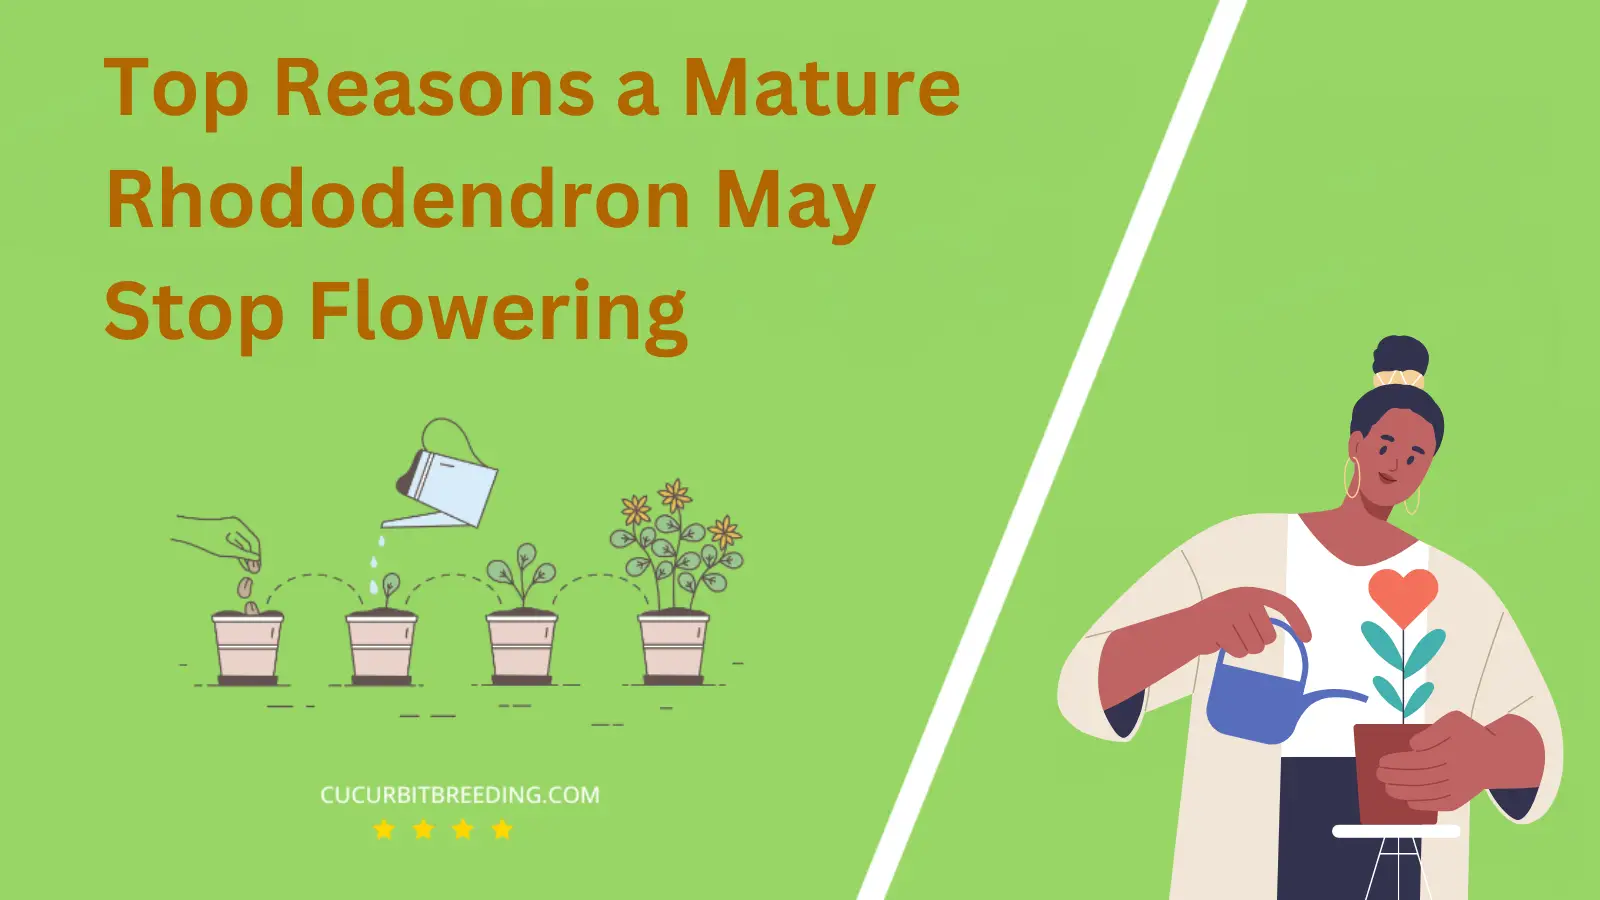 Top Reasons a Mature Rhododendron May Stop Flowering